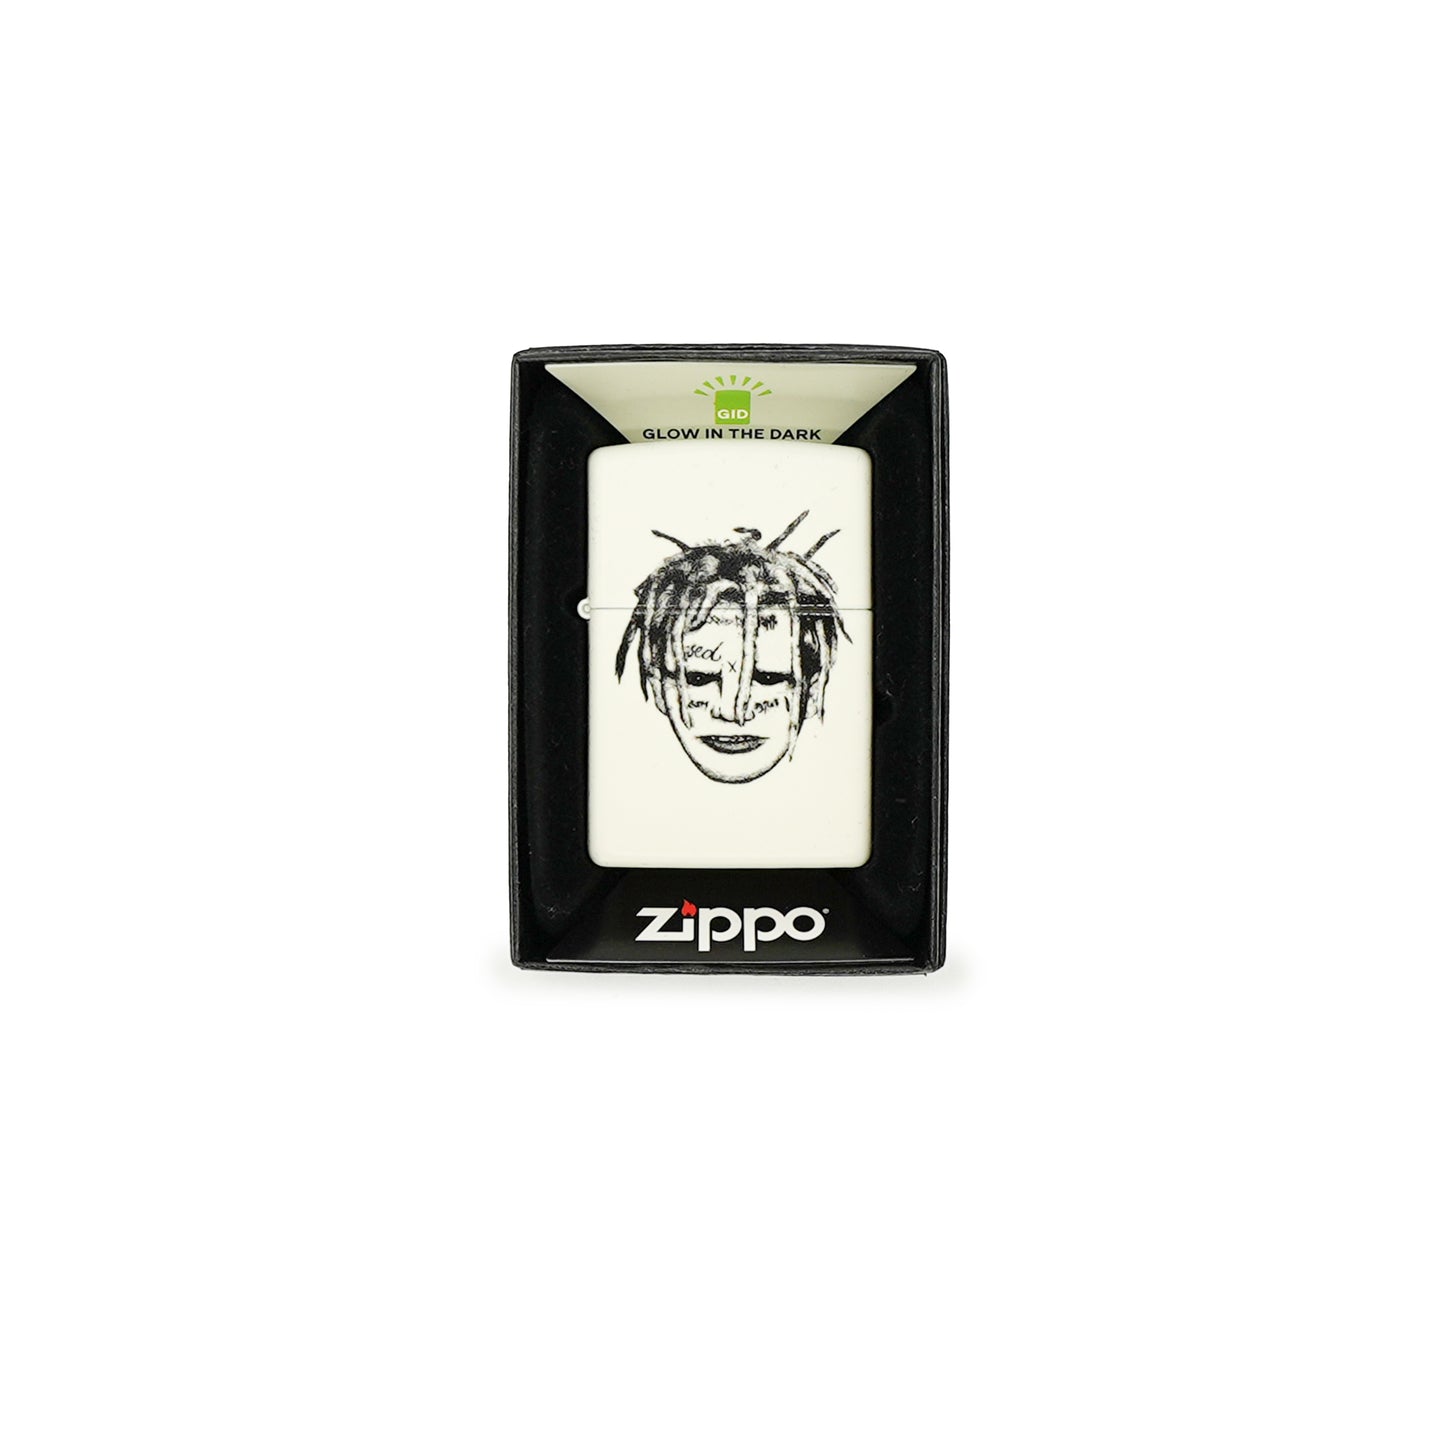 Chapter 17 - Zippo Lighter - Ever Dream This Man? - Glow in the Dark